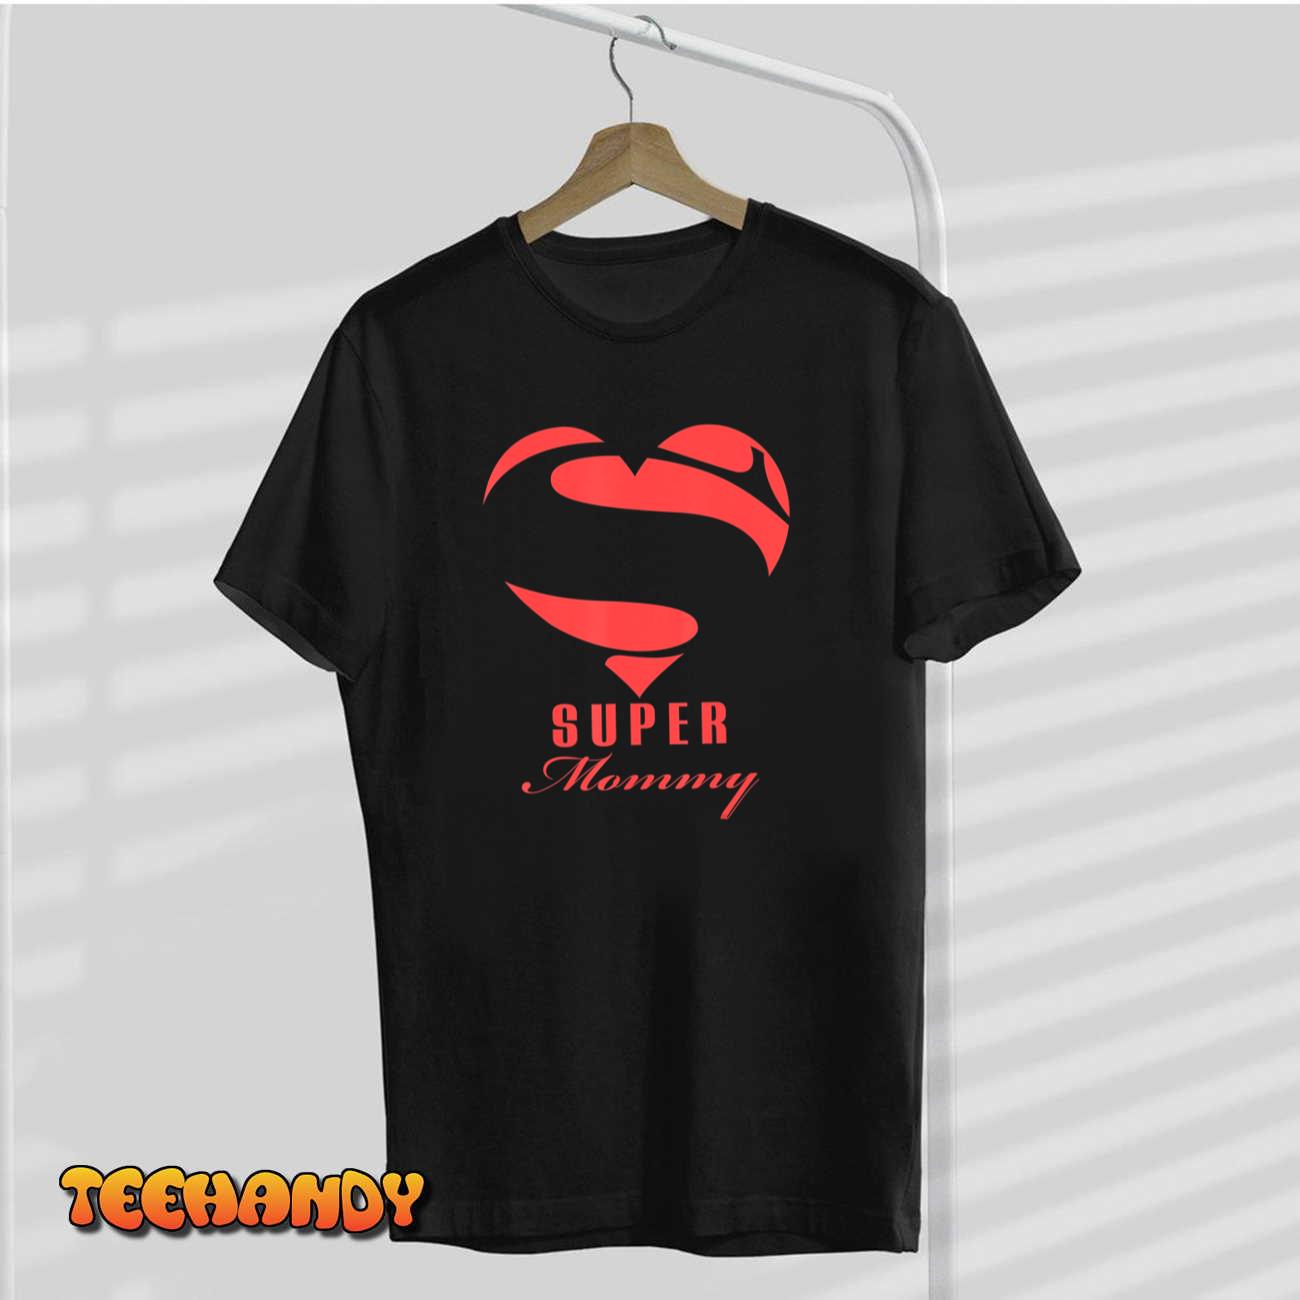 Super Mommy Superhero Mommy T Shirt Gift Mother Father Day